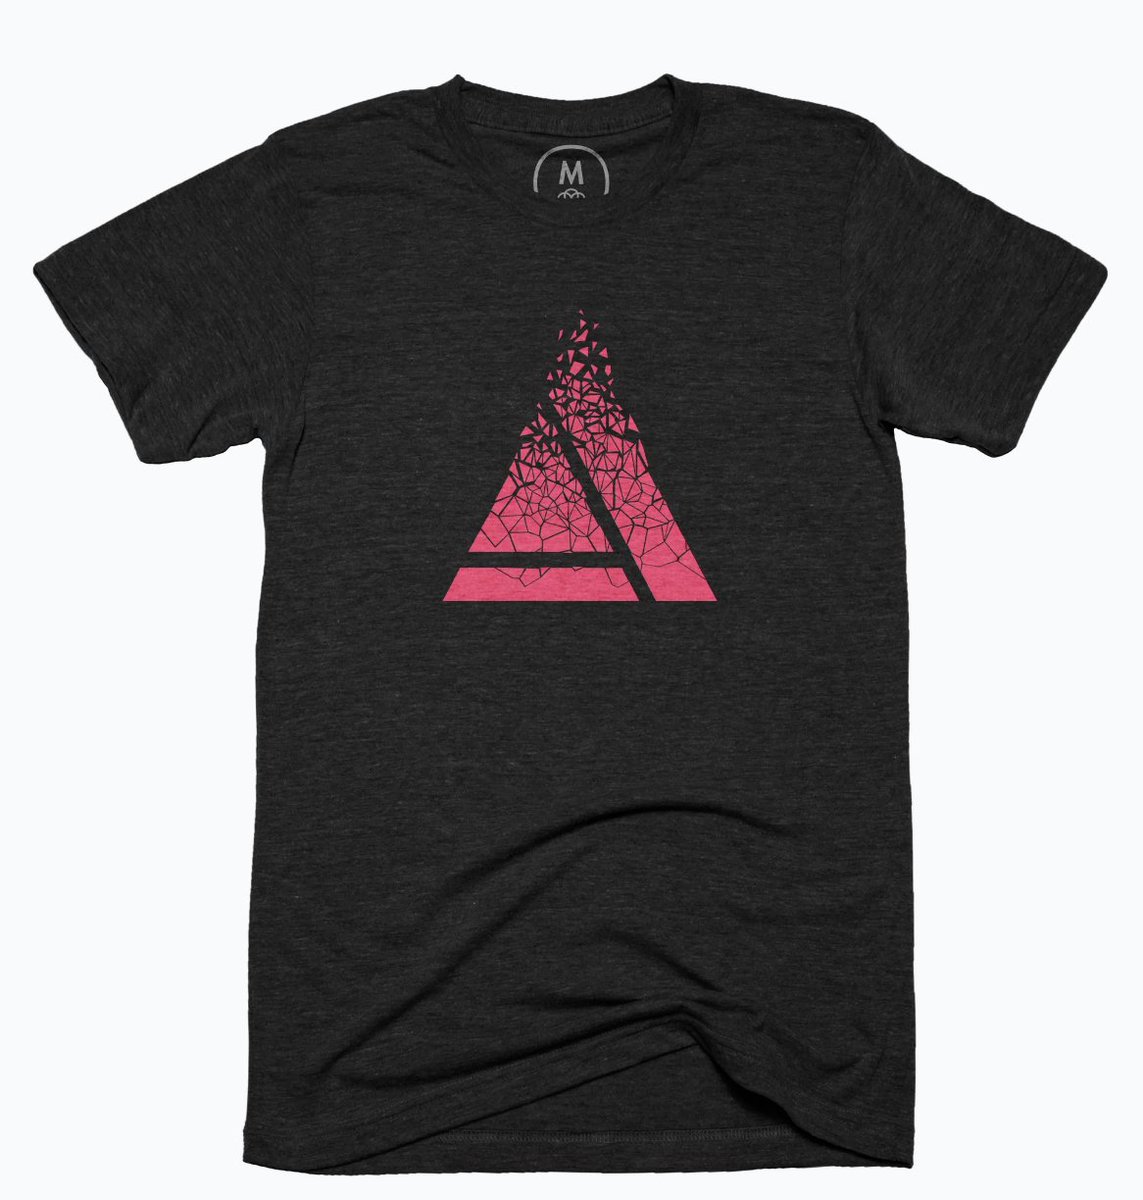 Just crossed someone in the street wearing an @aframevr shirt. It made so happy 🥰 Get yours and rock the free 3D Web! cottonbureau.com/people/diego-m…